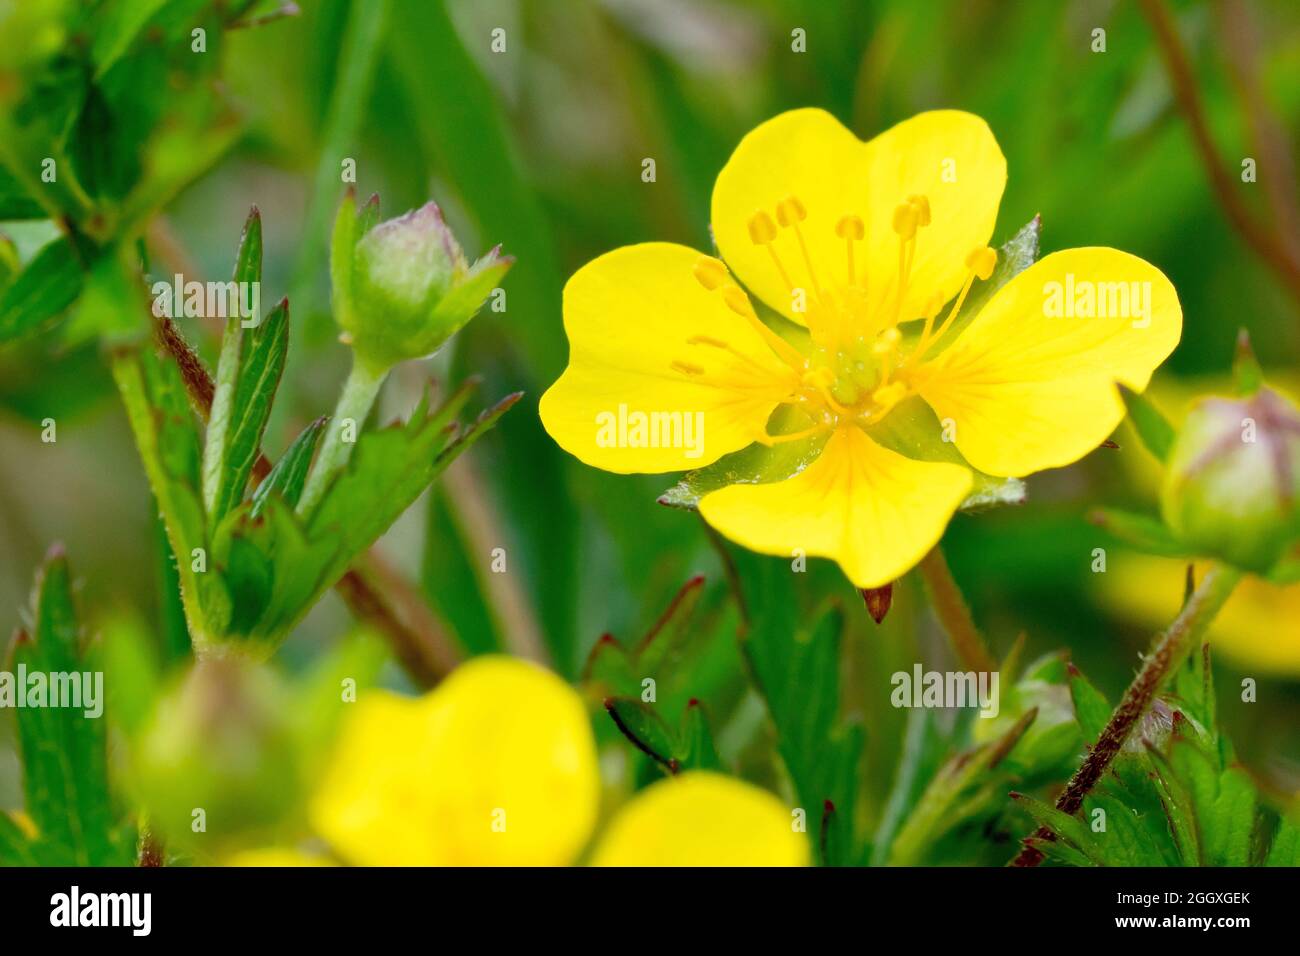 Tormentil (potentilla erecta), close up of a single yellow flower growing amidst others. Stock Photo